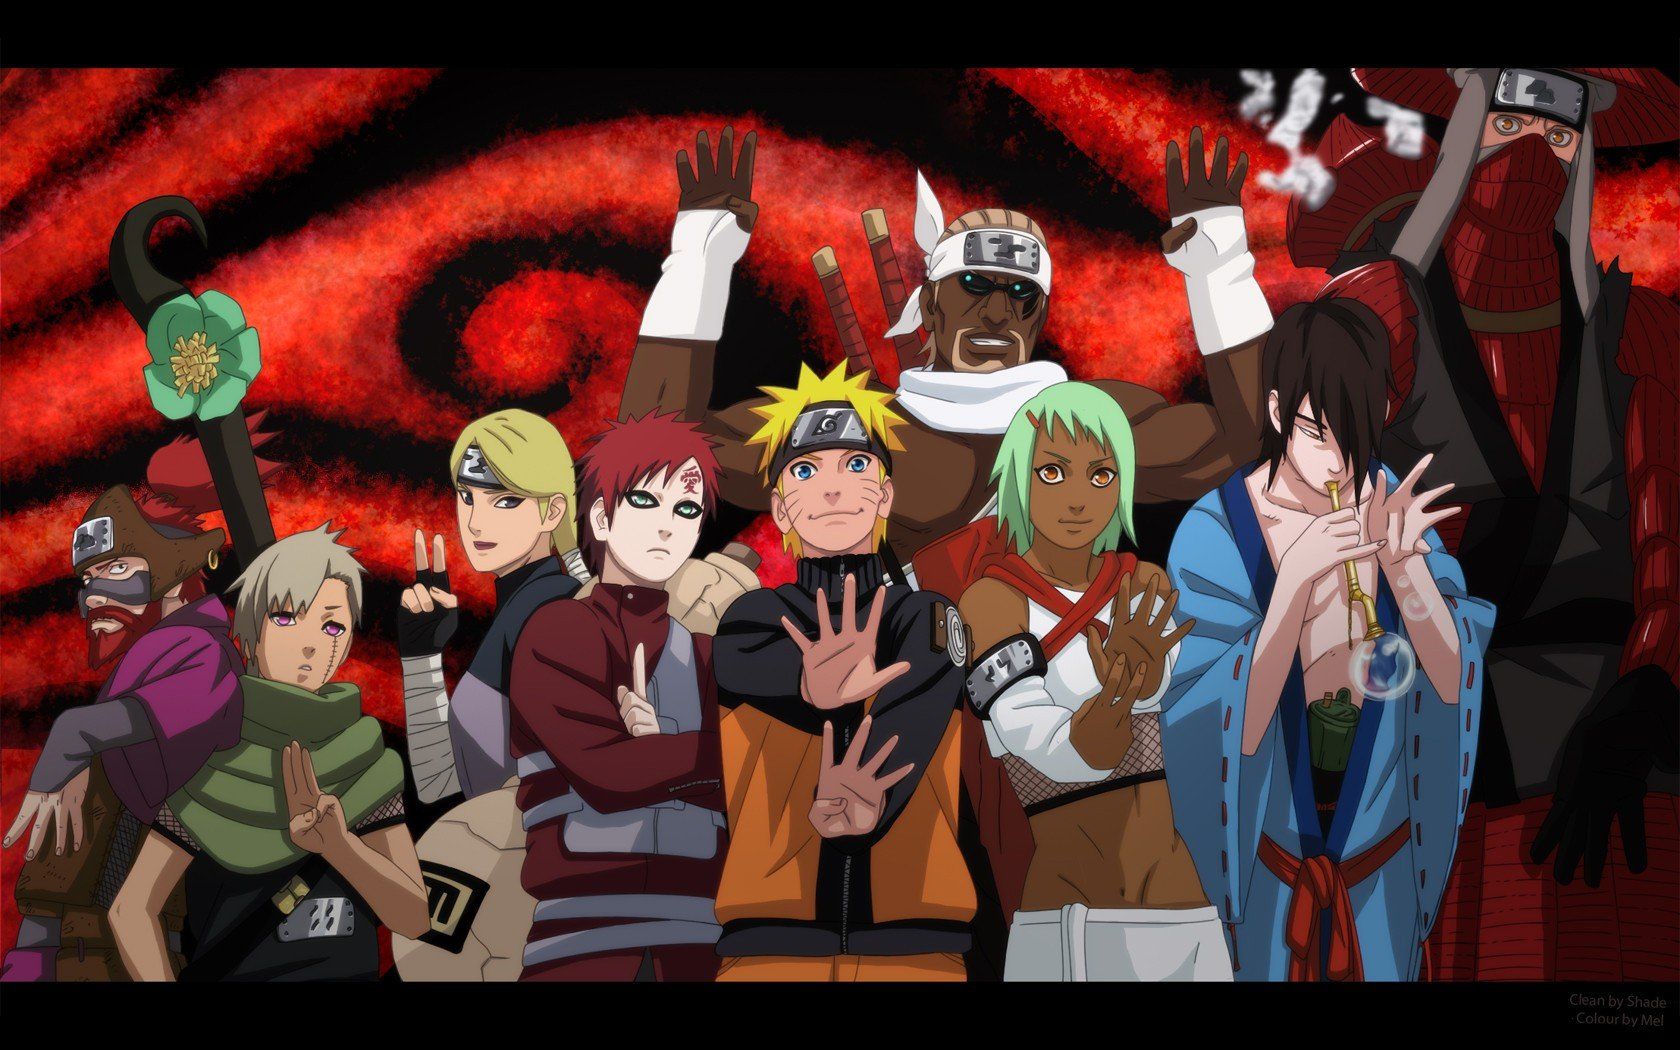 Free download Wallpaper Naruto Shippuden Team HD 4k Picture Pc 1680x1050 The [1680x1050] for your Desktop, Mobile & Tablet. Explore Naruto Shippuden Wallpaper For Desktop. Naruto Laptop Wallpaper, Naruto Wallpaper Download